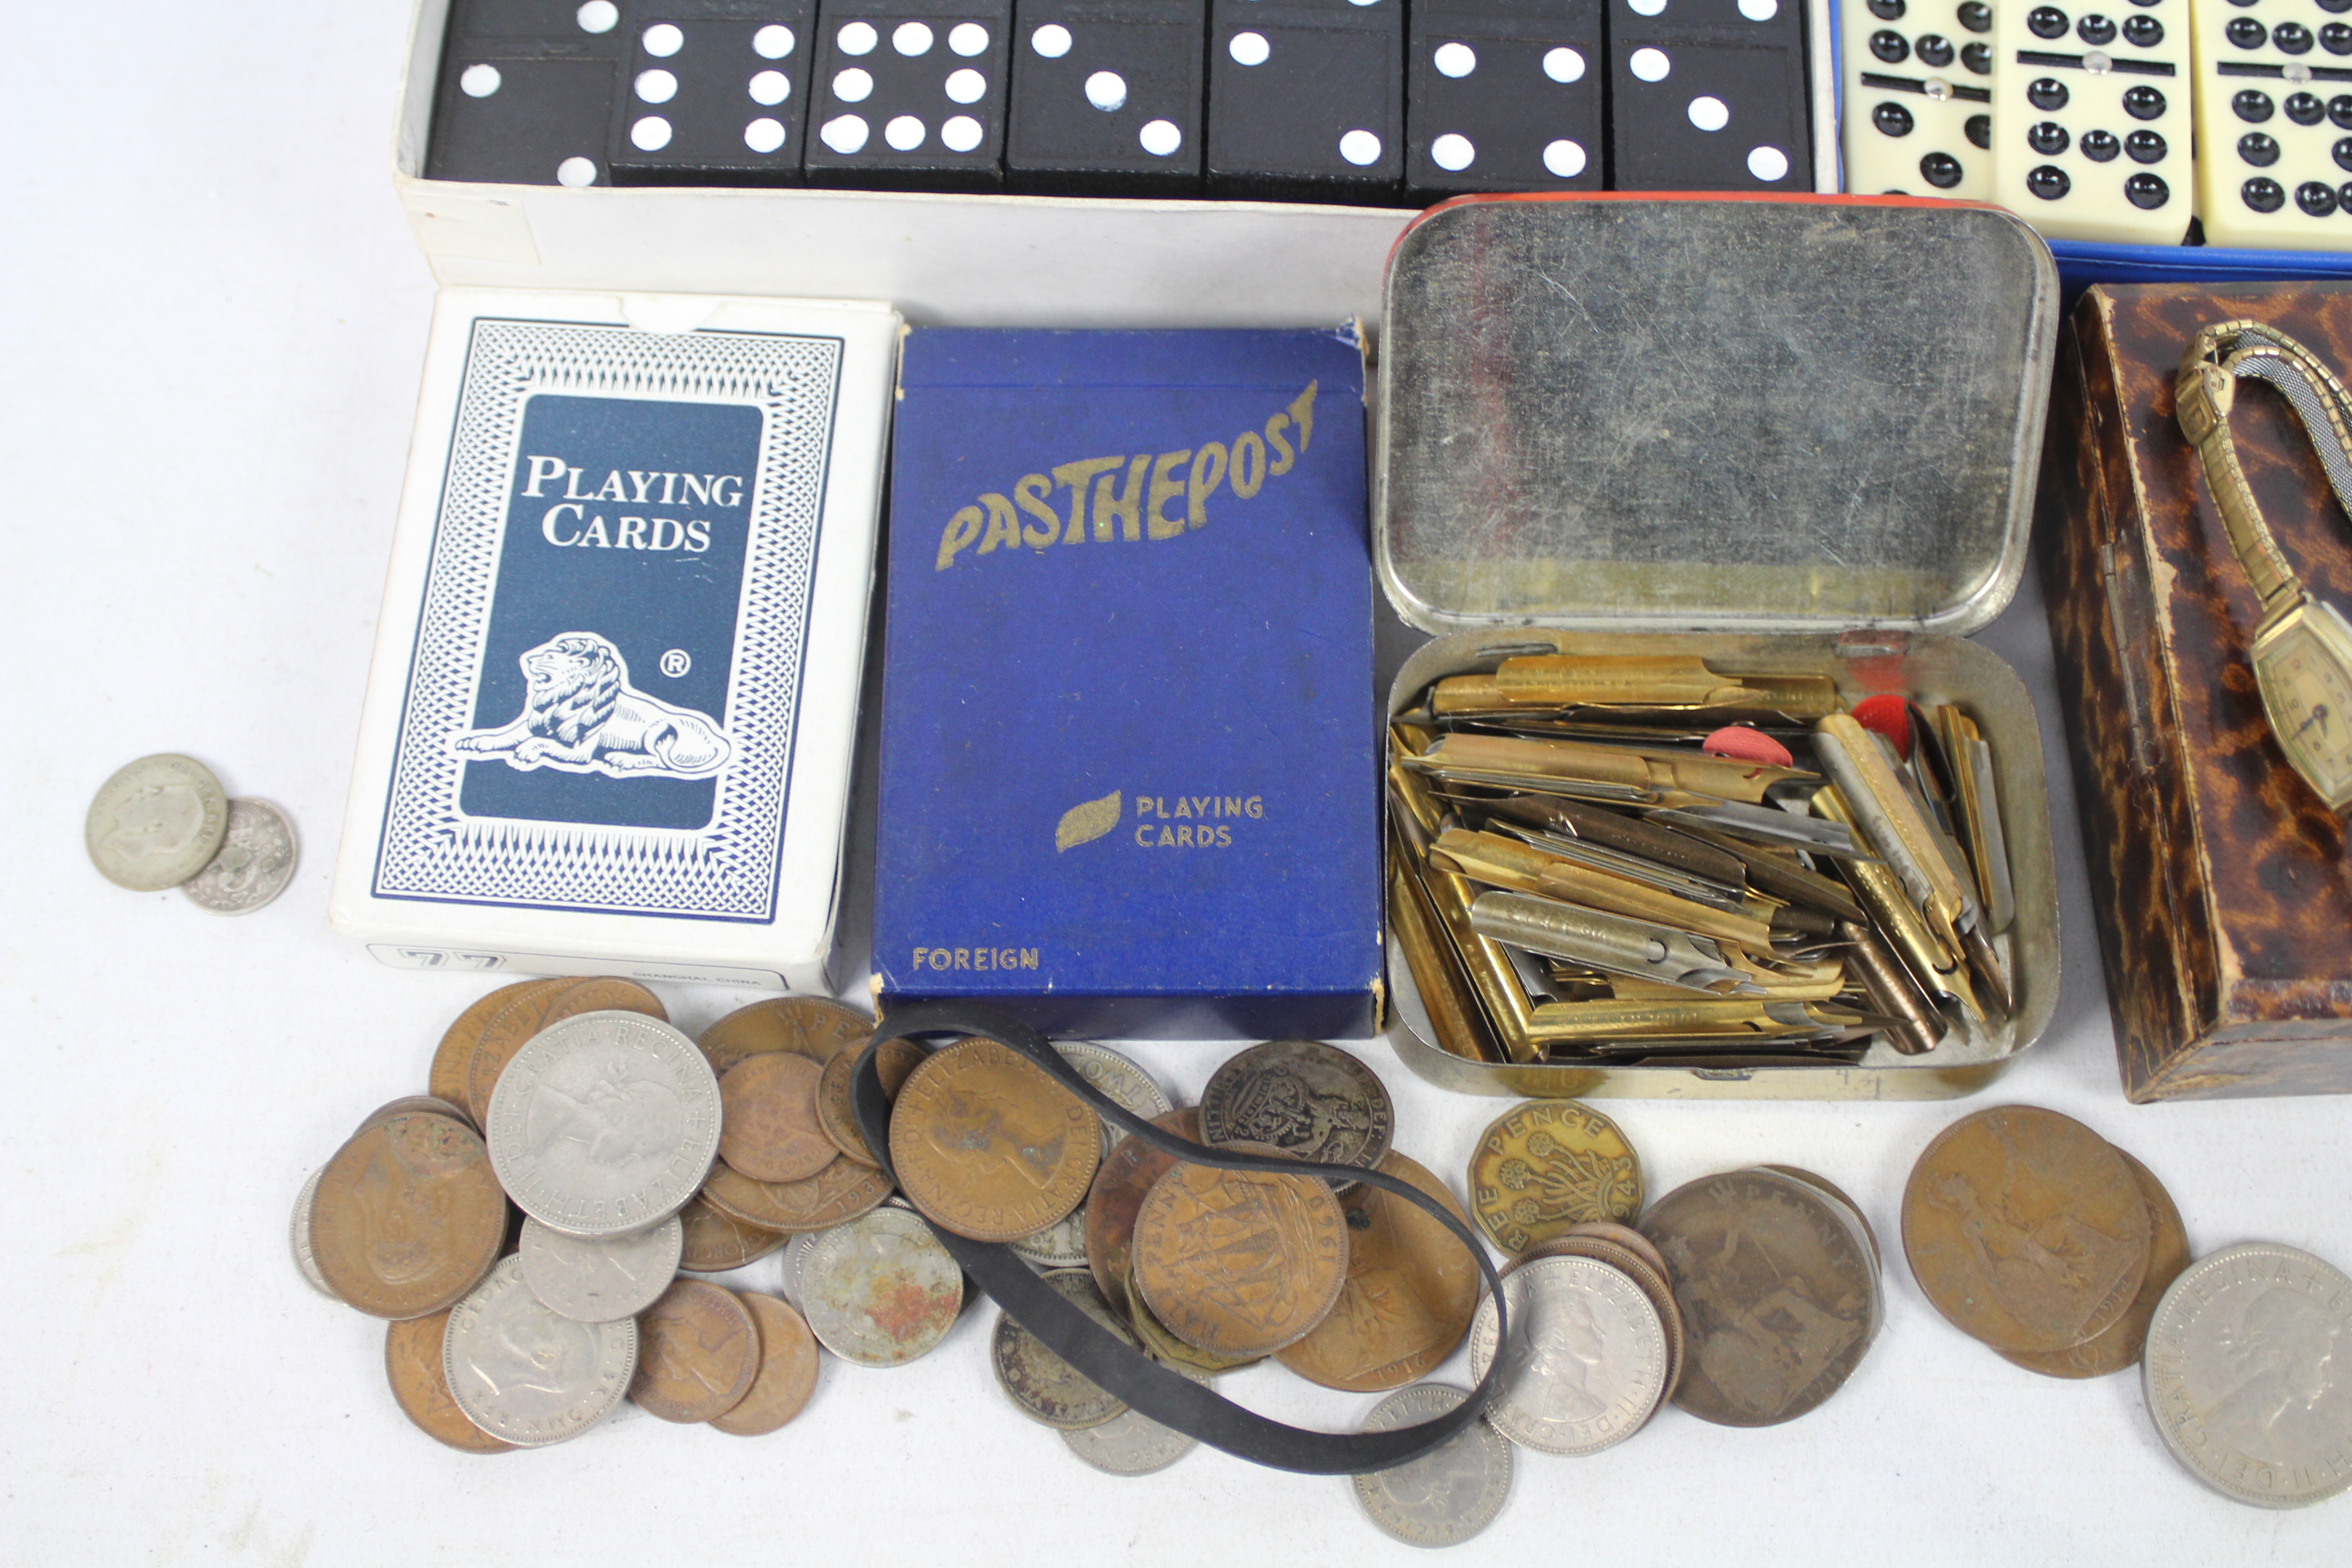 Lot to include a vintage wrist watch, two sets of double nine dominoes, playing cards, pen nibs, - Image 2 of 4